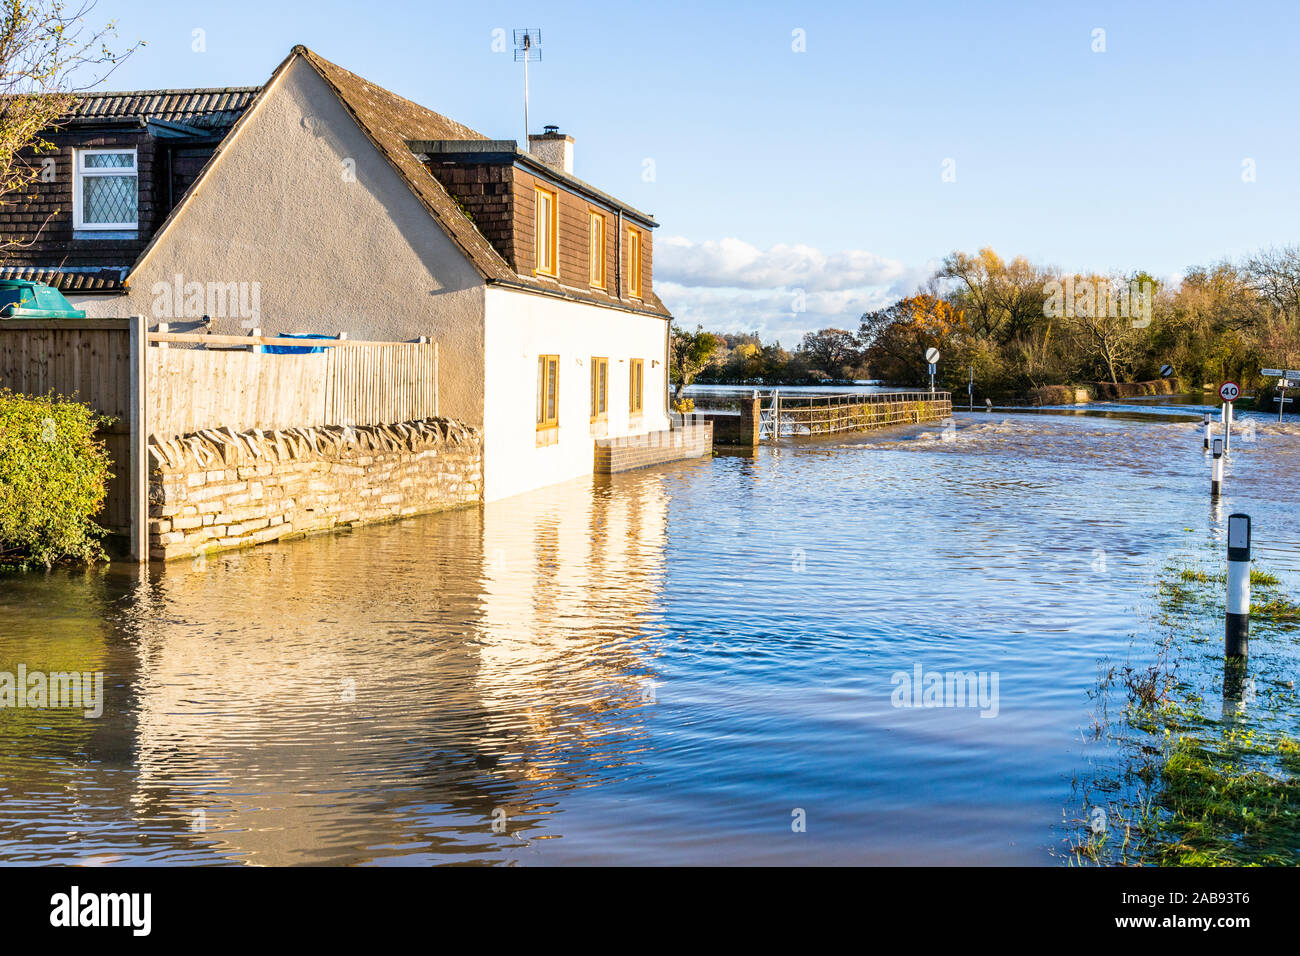 Cottage in floodwater from River Severn closing the B4213 on the approach to Haw Bridge in the Severn Vale village of Tirley, Glouceshire 18/11/2019 Stock Photo